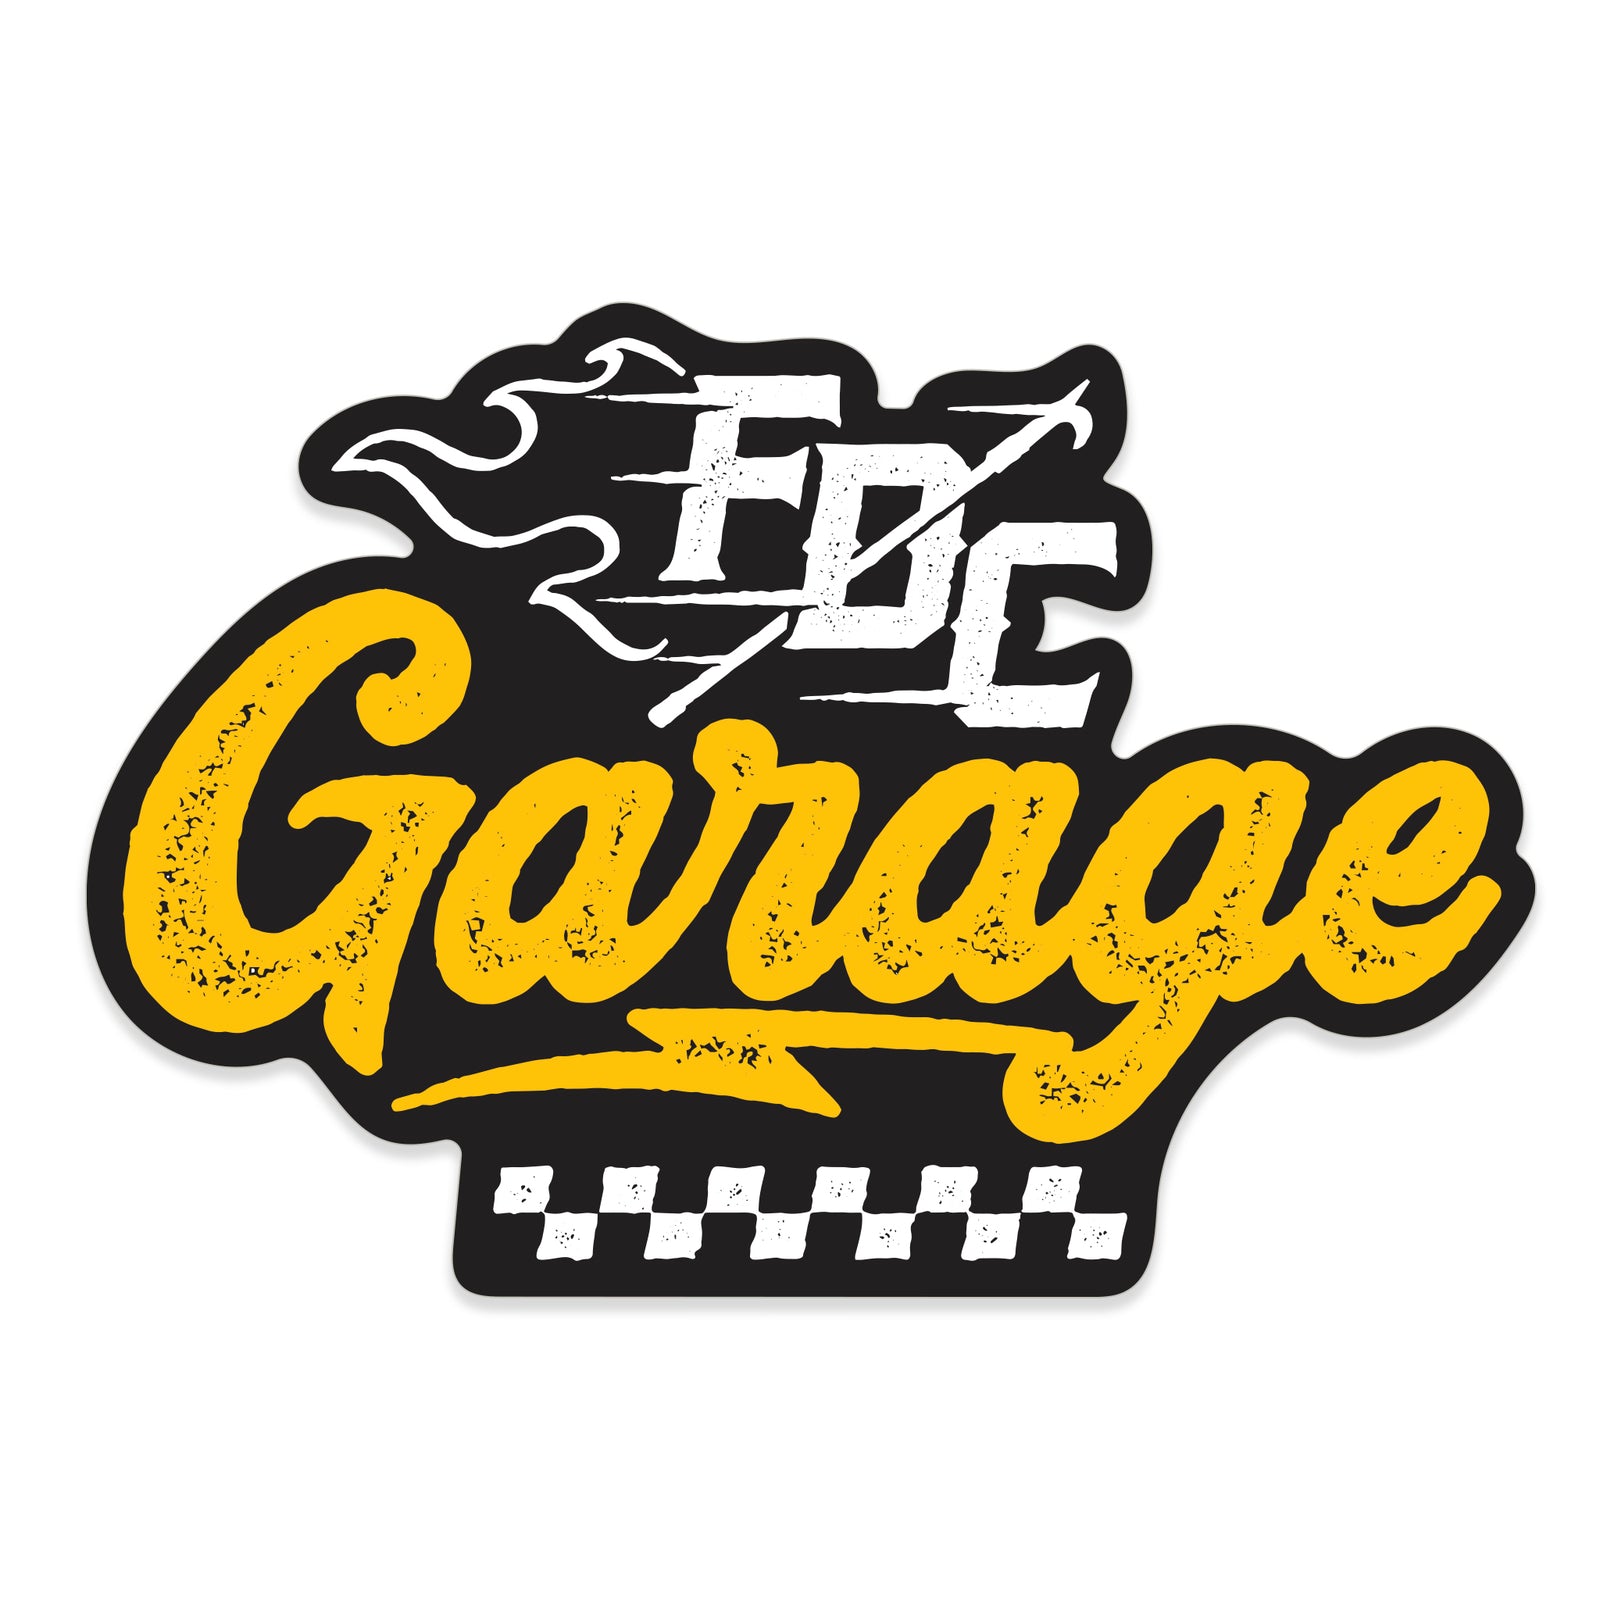 The word "Garage" in yellow text with "FDC" in flames above and a checkered flag design below.